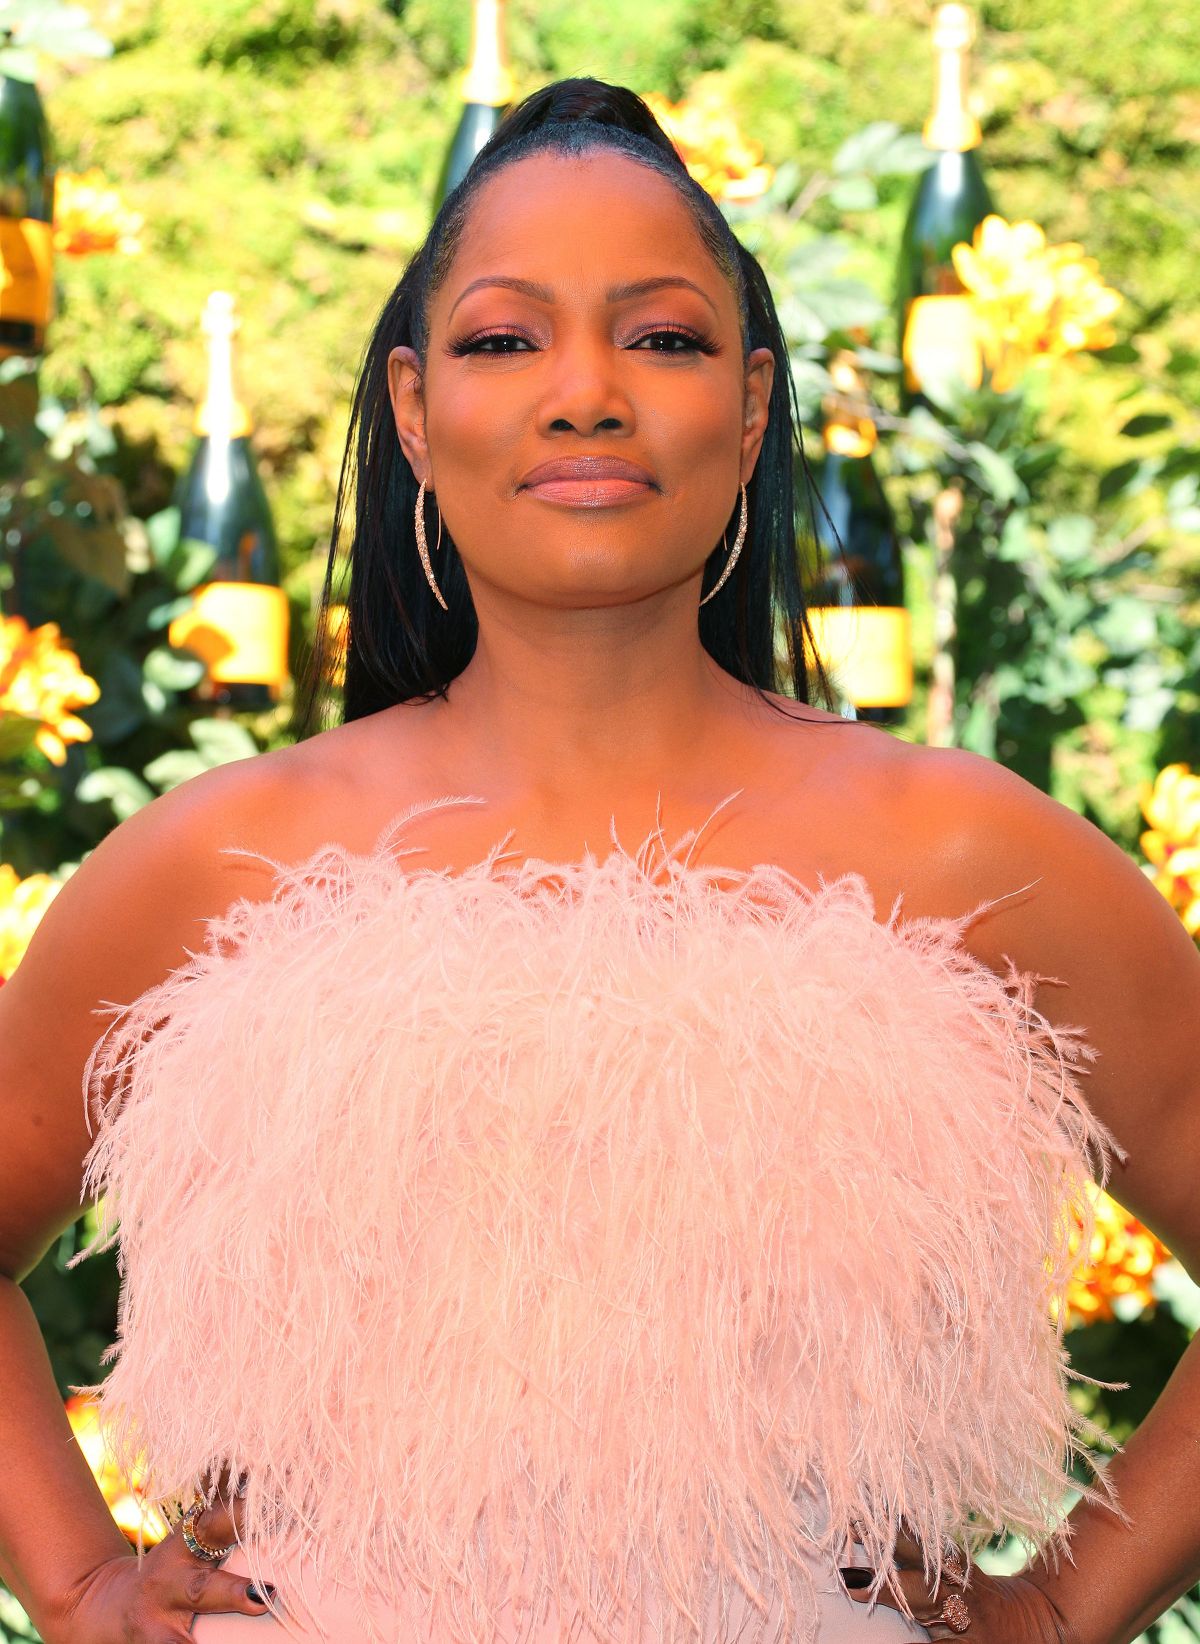 garcelle-beauvais-at-veuve-clicquot-polo-classic-at-will-rogers-state-park-in-los-angeles-10-05-2019-12.jpg